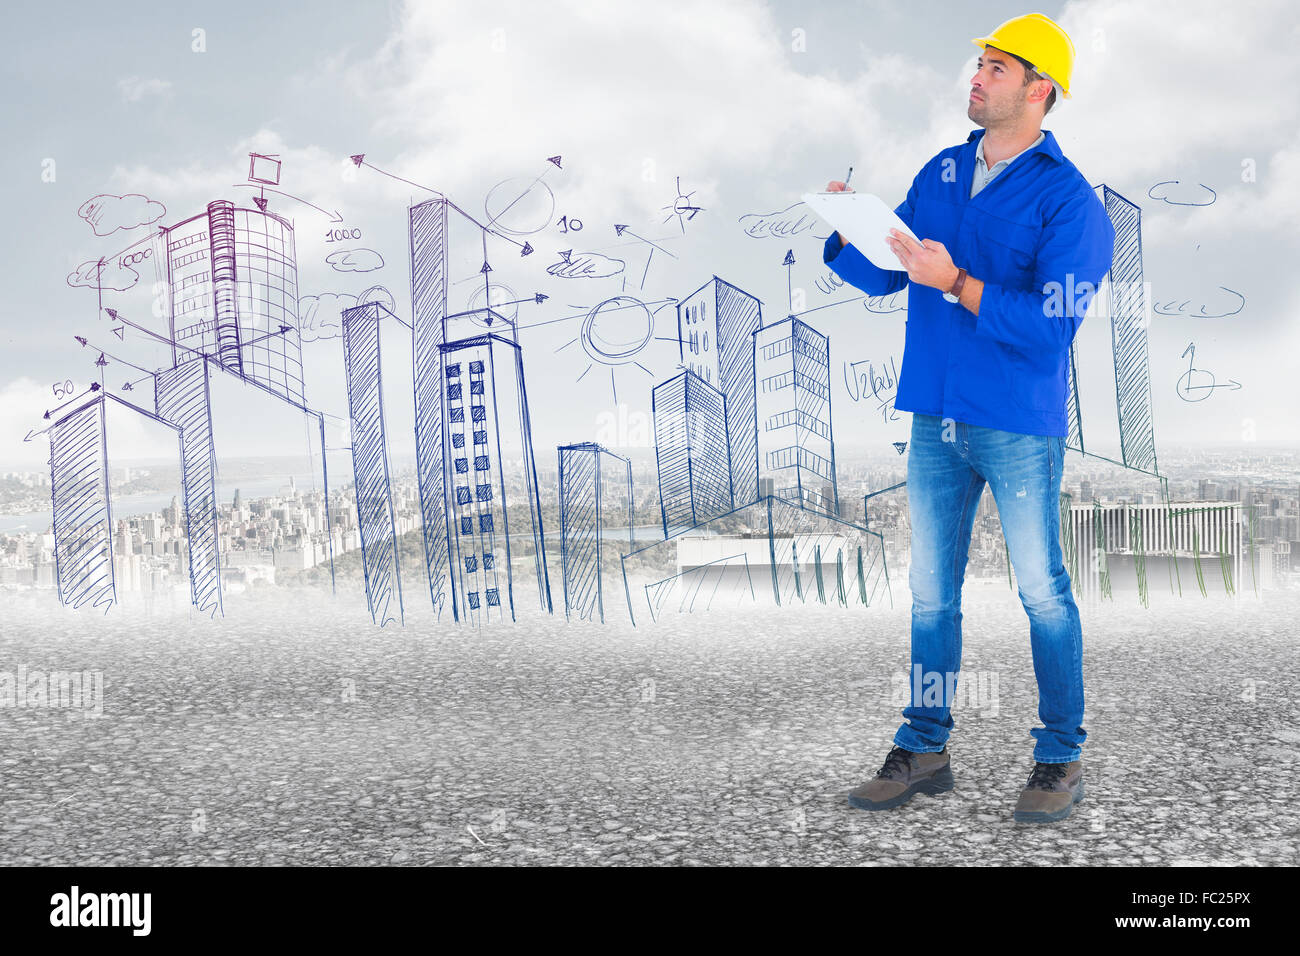 Composite image of manual worker looking up while writing on clipboard Stock Photo